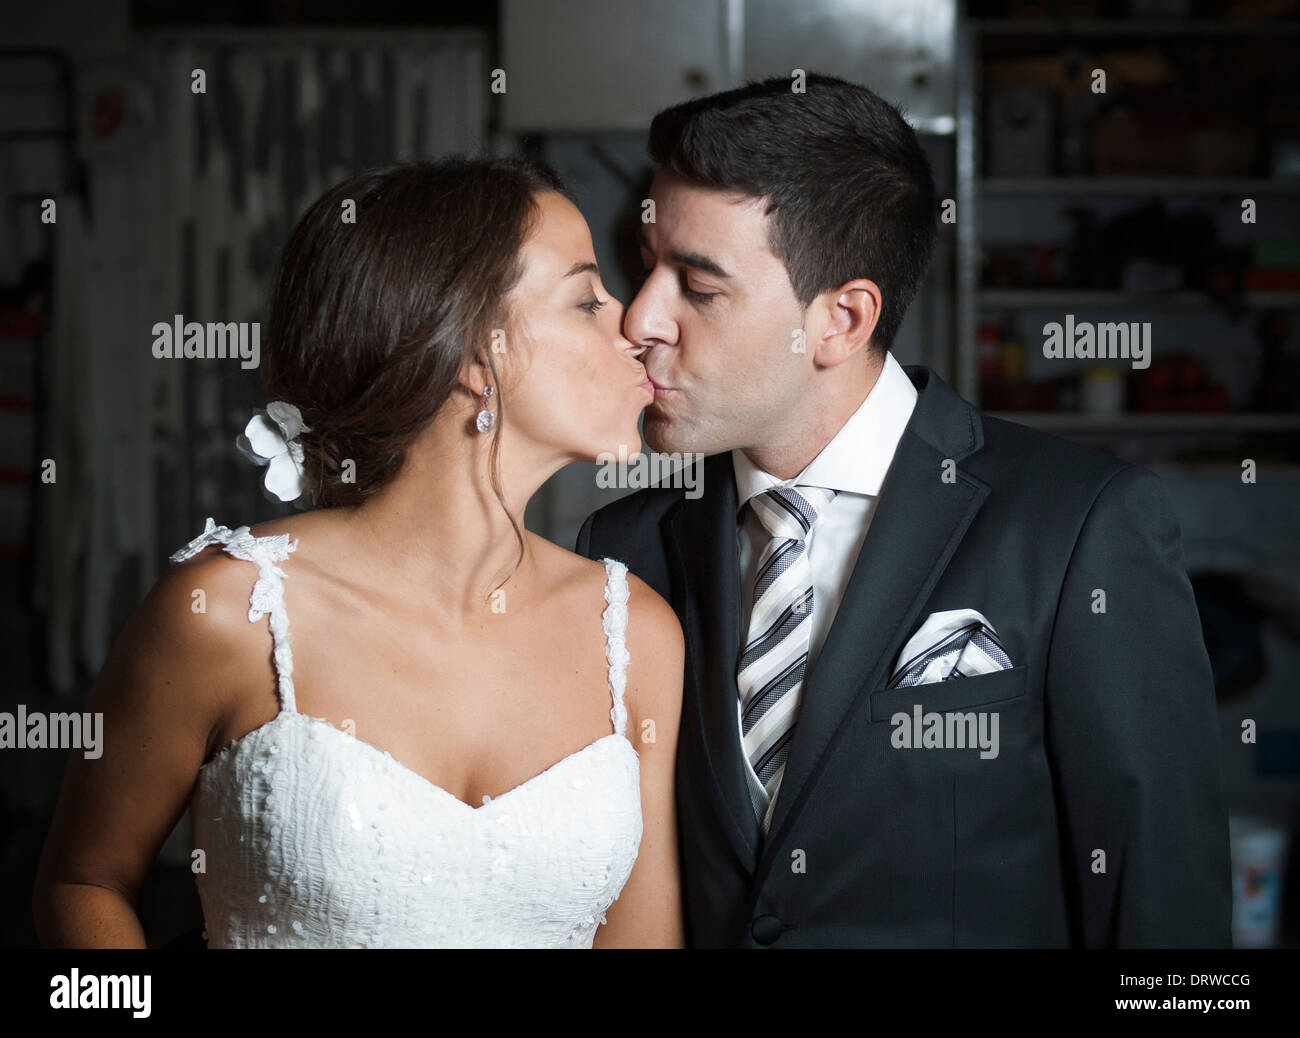 Wedding couple kissing each other indoors Stock Photo